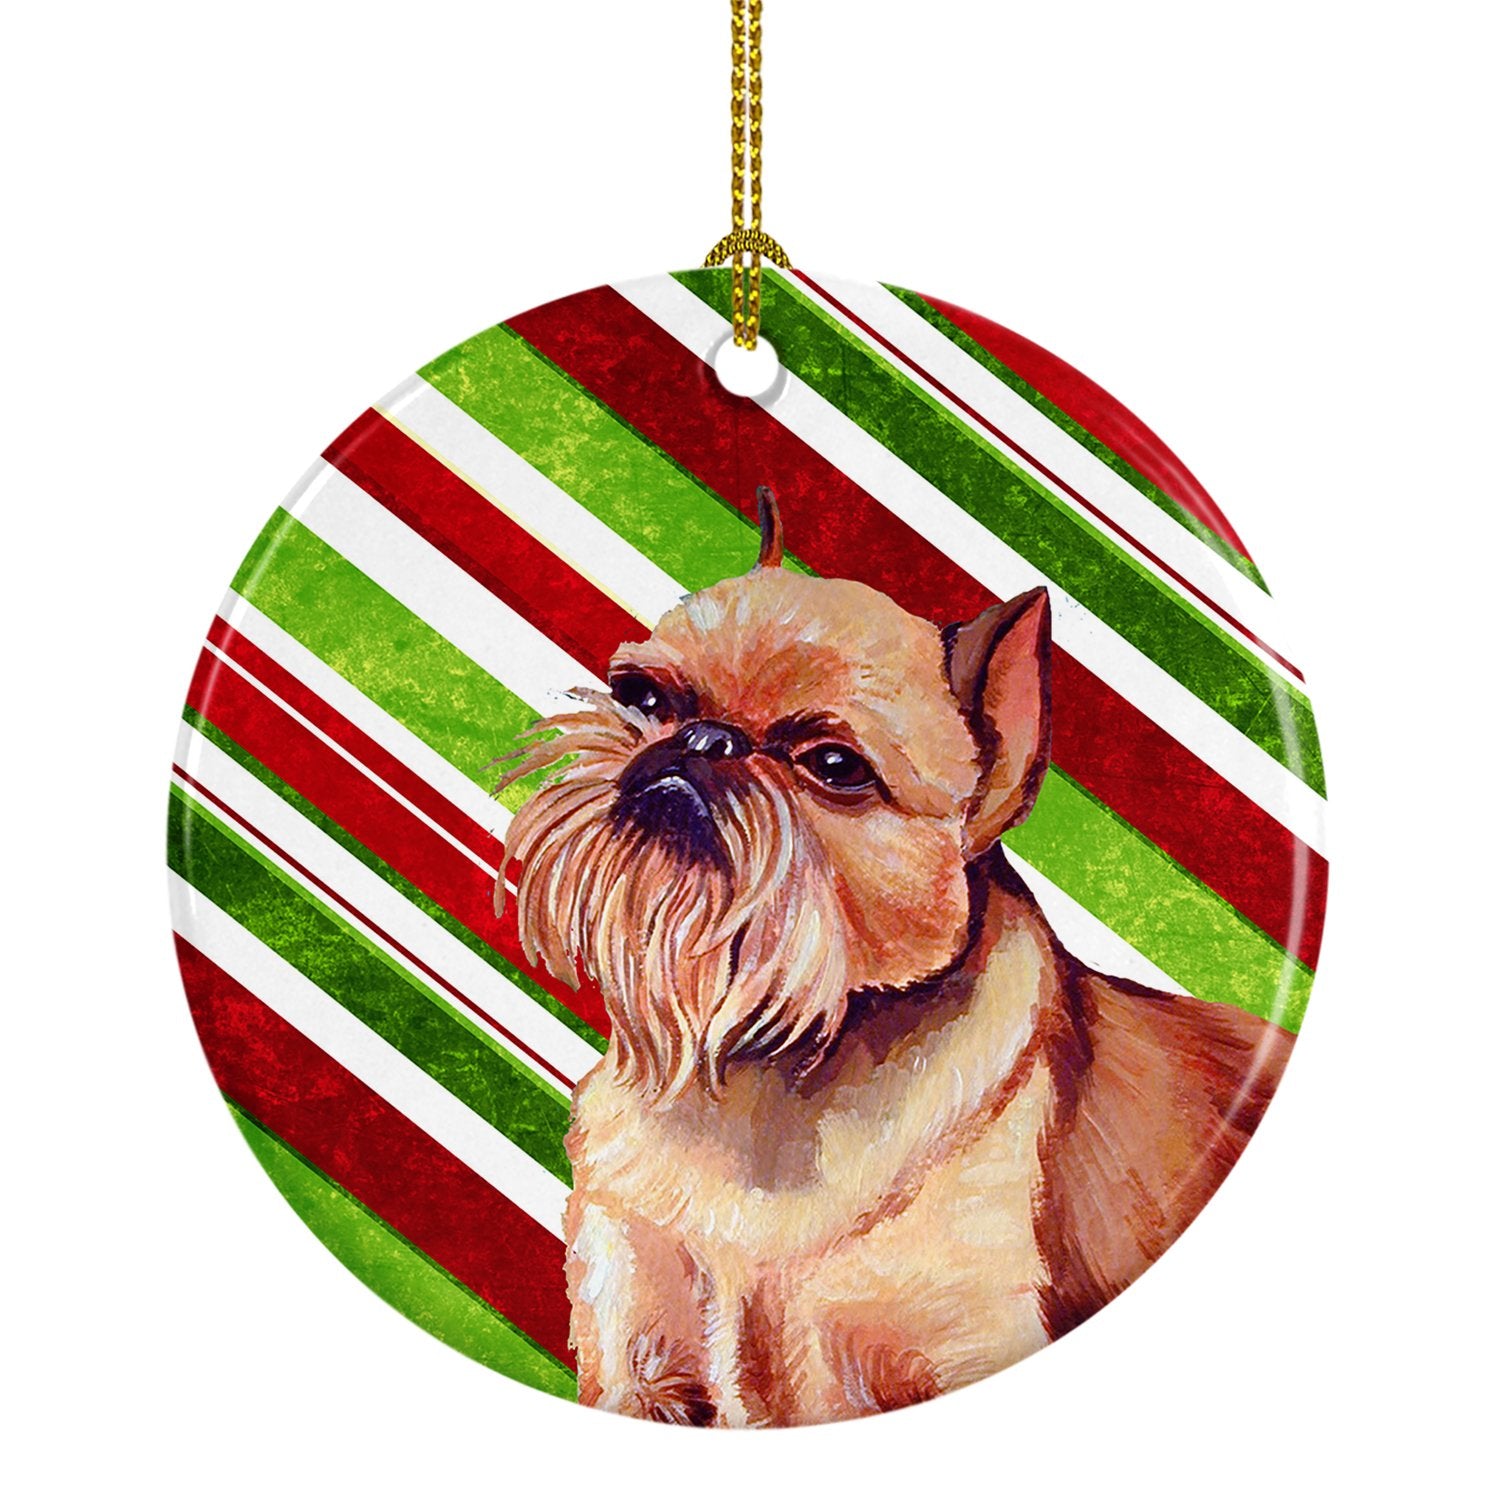 Brussels Griffon Candy Cane Holiday Christmas Ceramic Ornament LH9224 by Caroline's Treasures